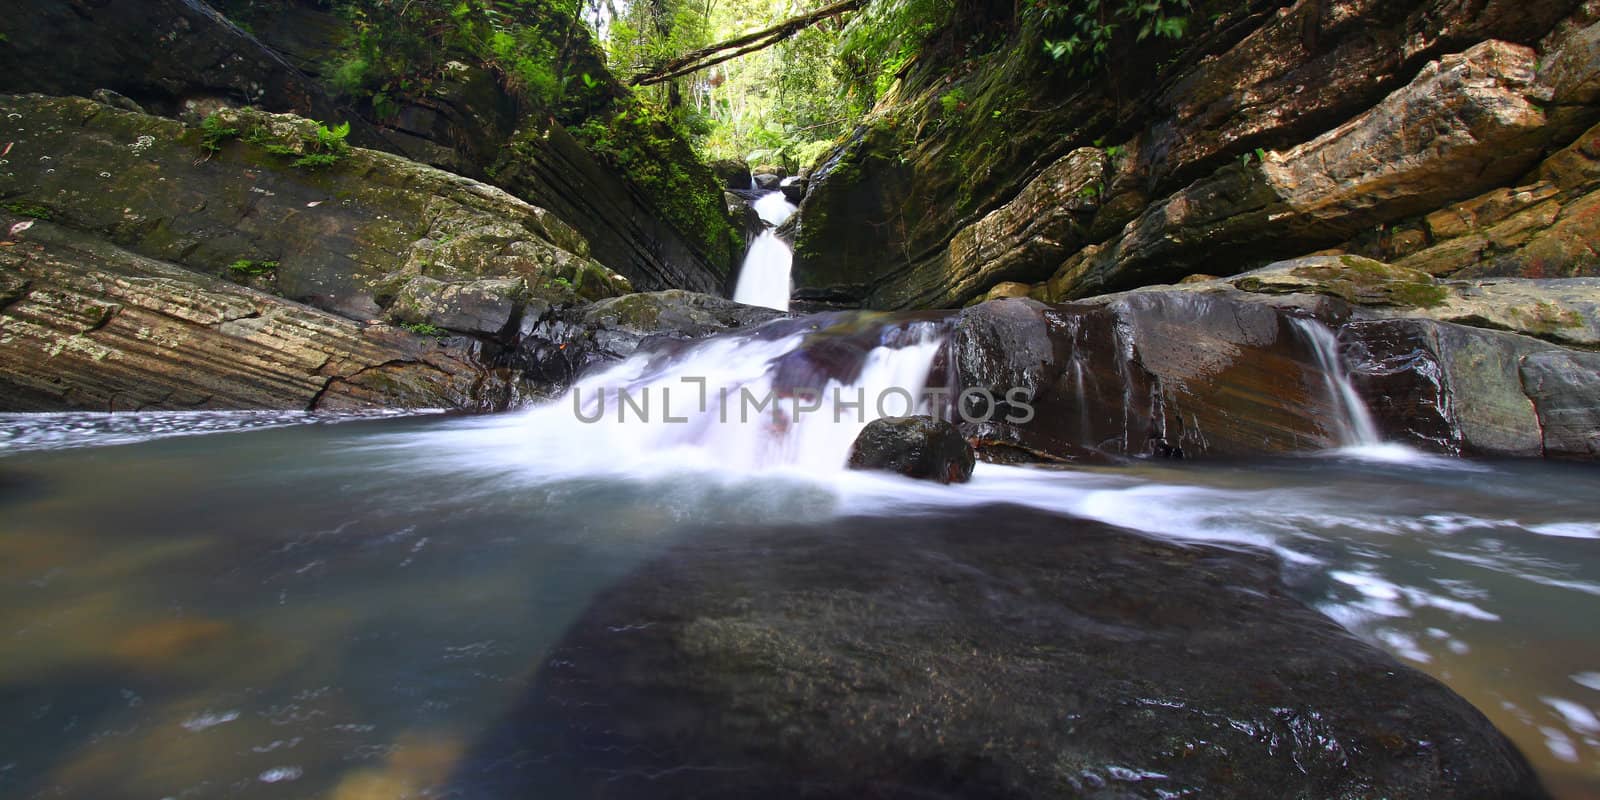 El Yunque National Forest by Wirepec